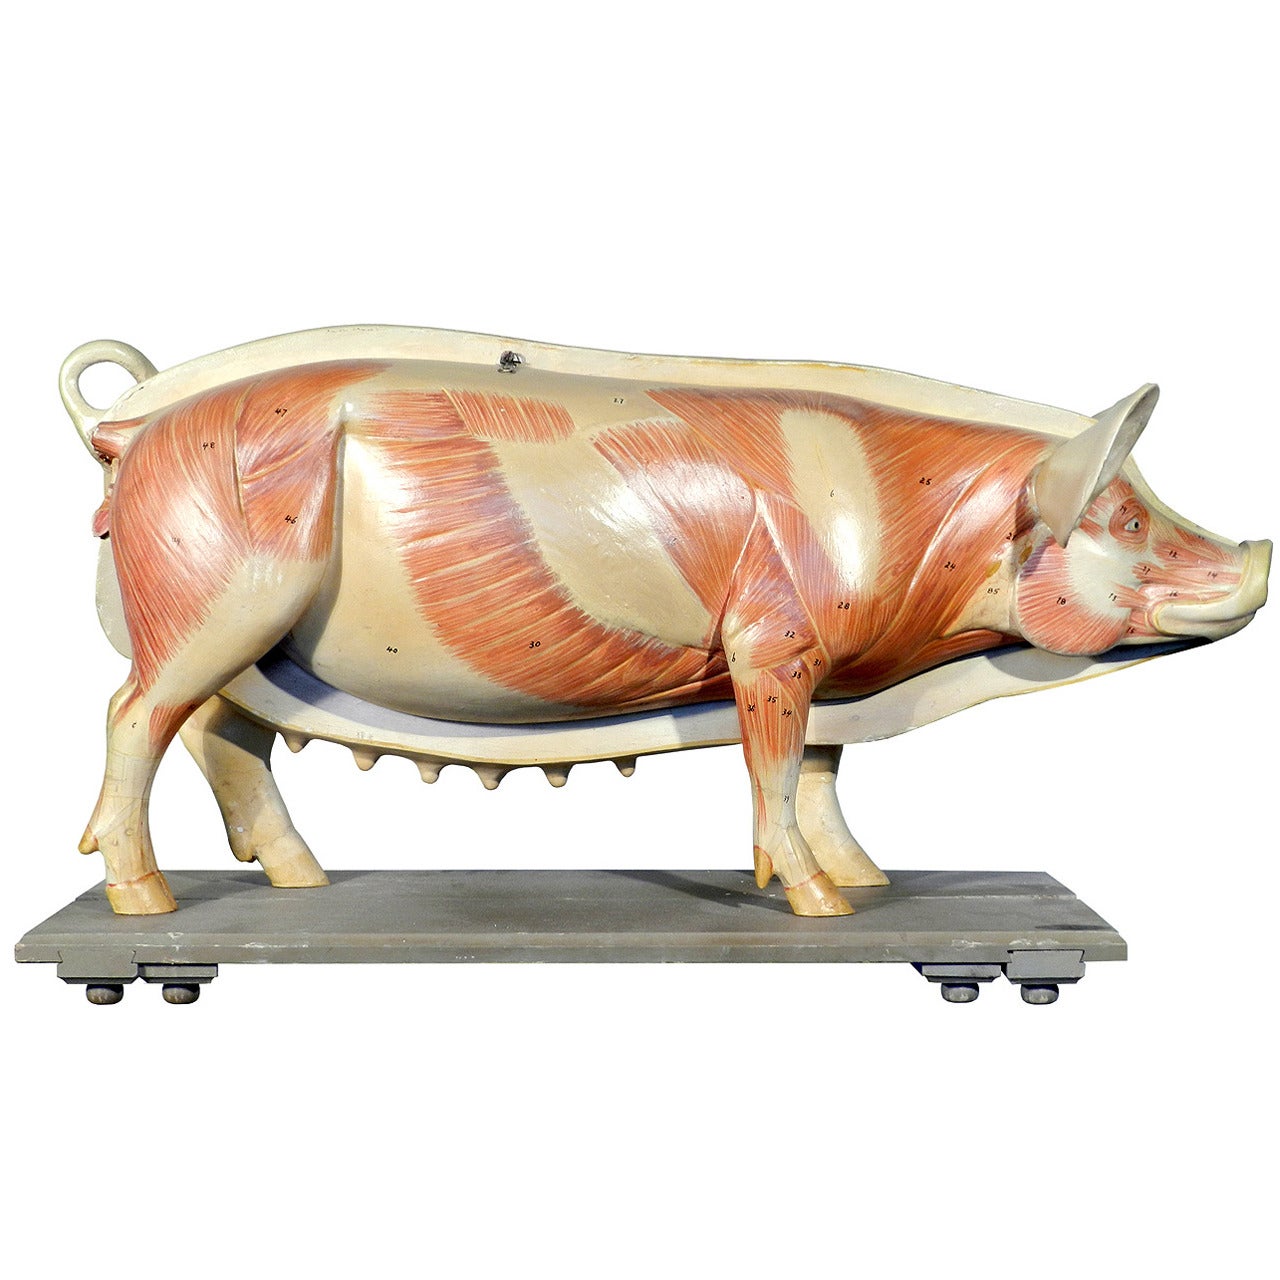 Life Size Anatomical Model of Pig, Germany